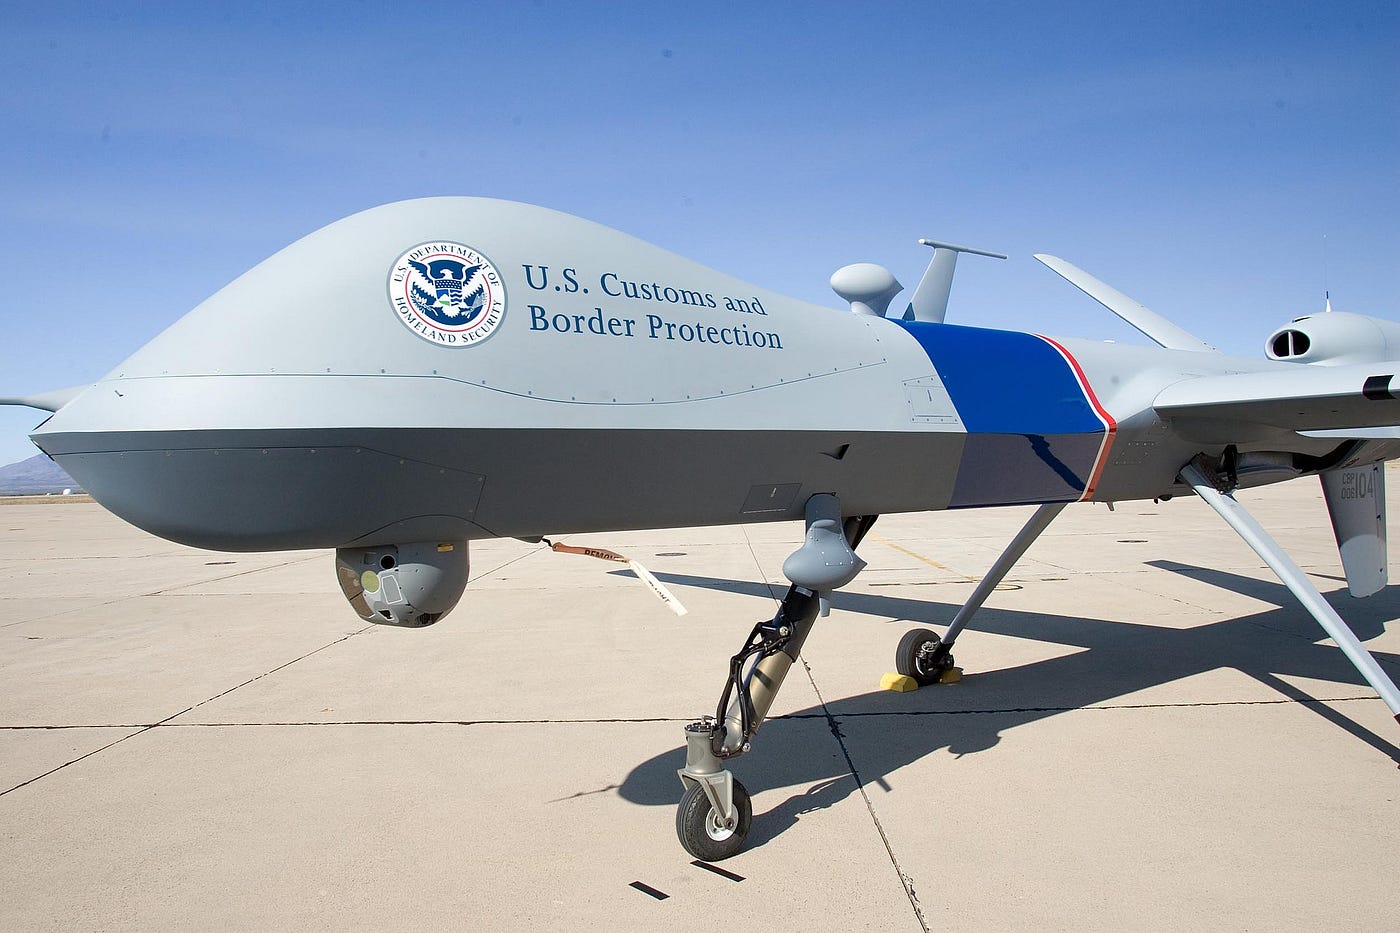 Predator Drone Surveillance in Minneapolis Is Just the Tip of the Iceberg |  by Kelsey D Atherton | OneZero